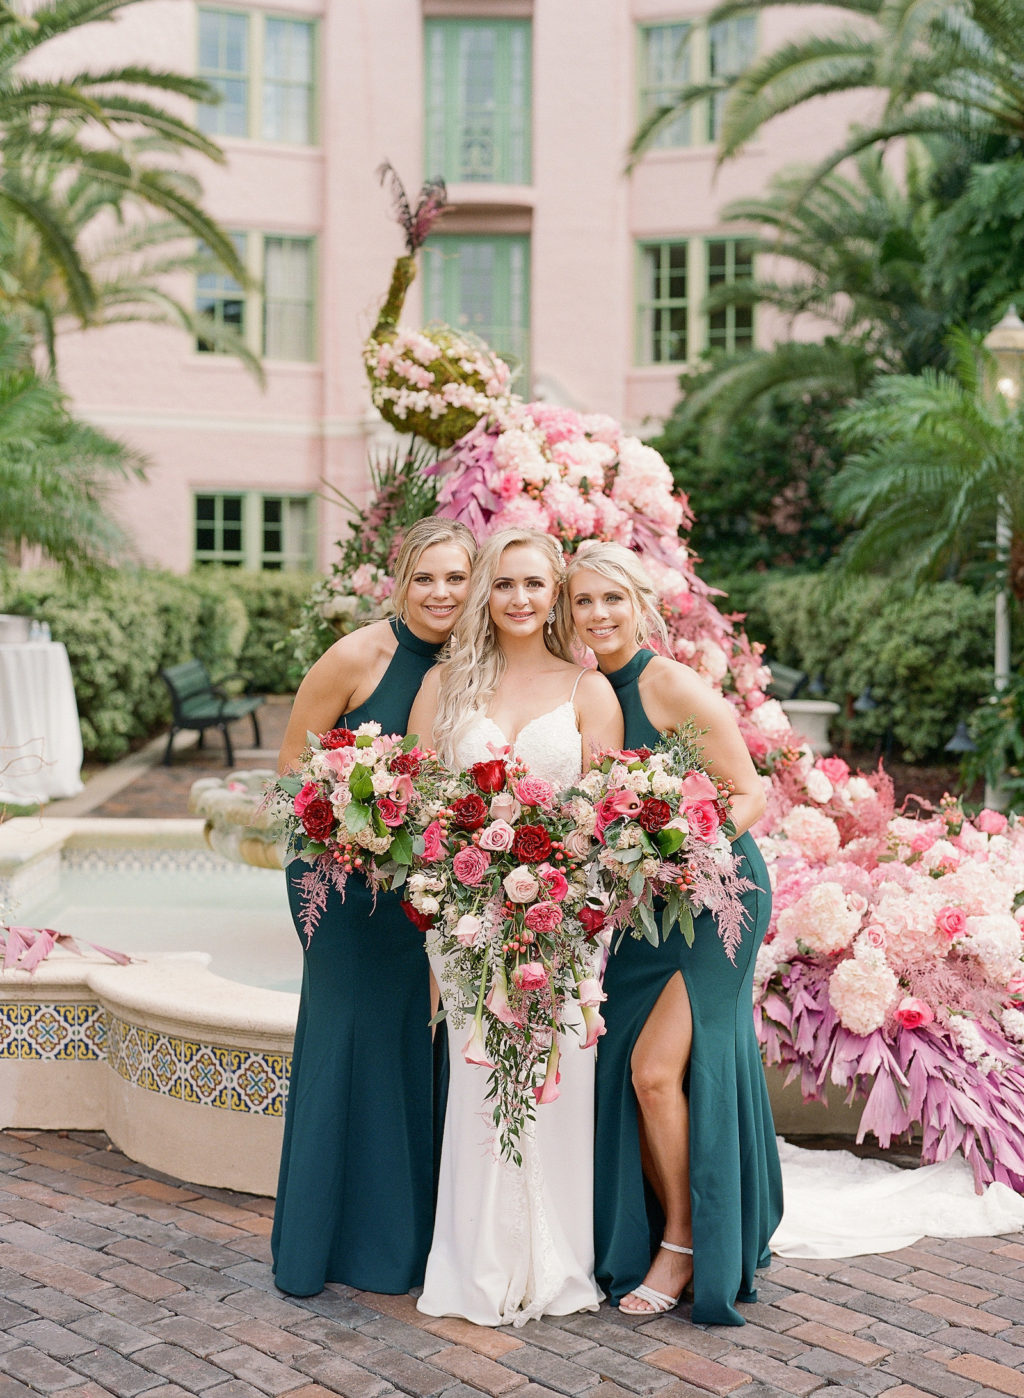 Elegant Bride with Bridesmaids in Emerald Green Dresses Holding Red, Pink and White Roses with Greenery Floral Bouquets Standing in Front of Courtyard Water Fountain with Floral Peacock Statue with Pink, White and Purple Lush Floral Tail | St. Pete Wedding Venue The Vinoy Renaissance | Tampa Bay Wedding Hair and Makeup Femme Akoi Beauty Studio | Florist Lemon Drops